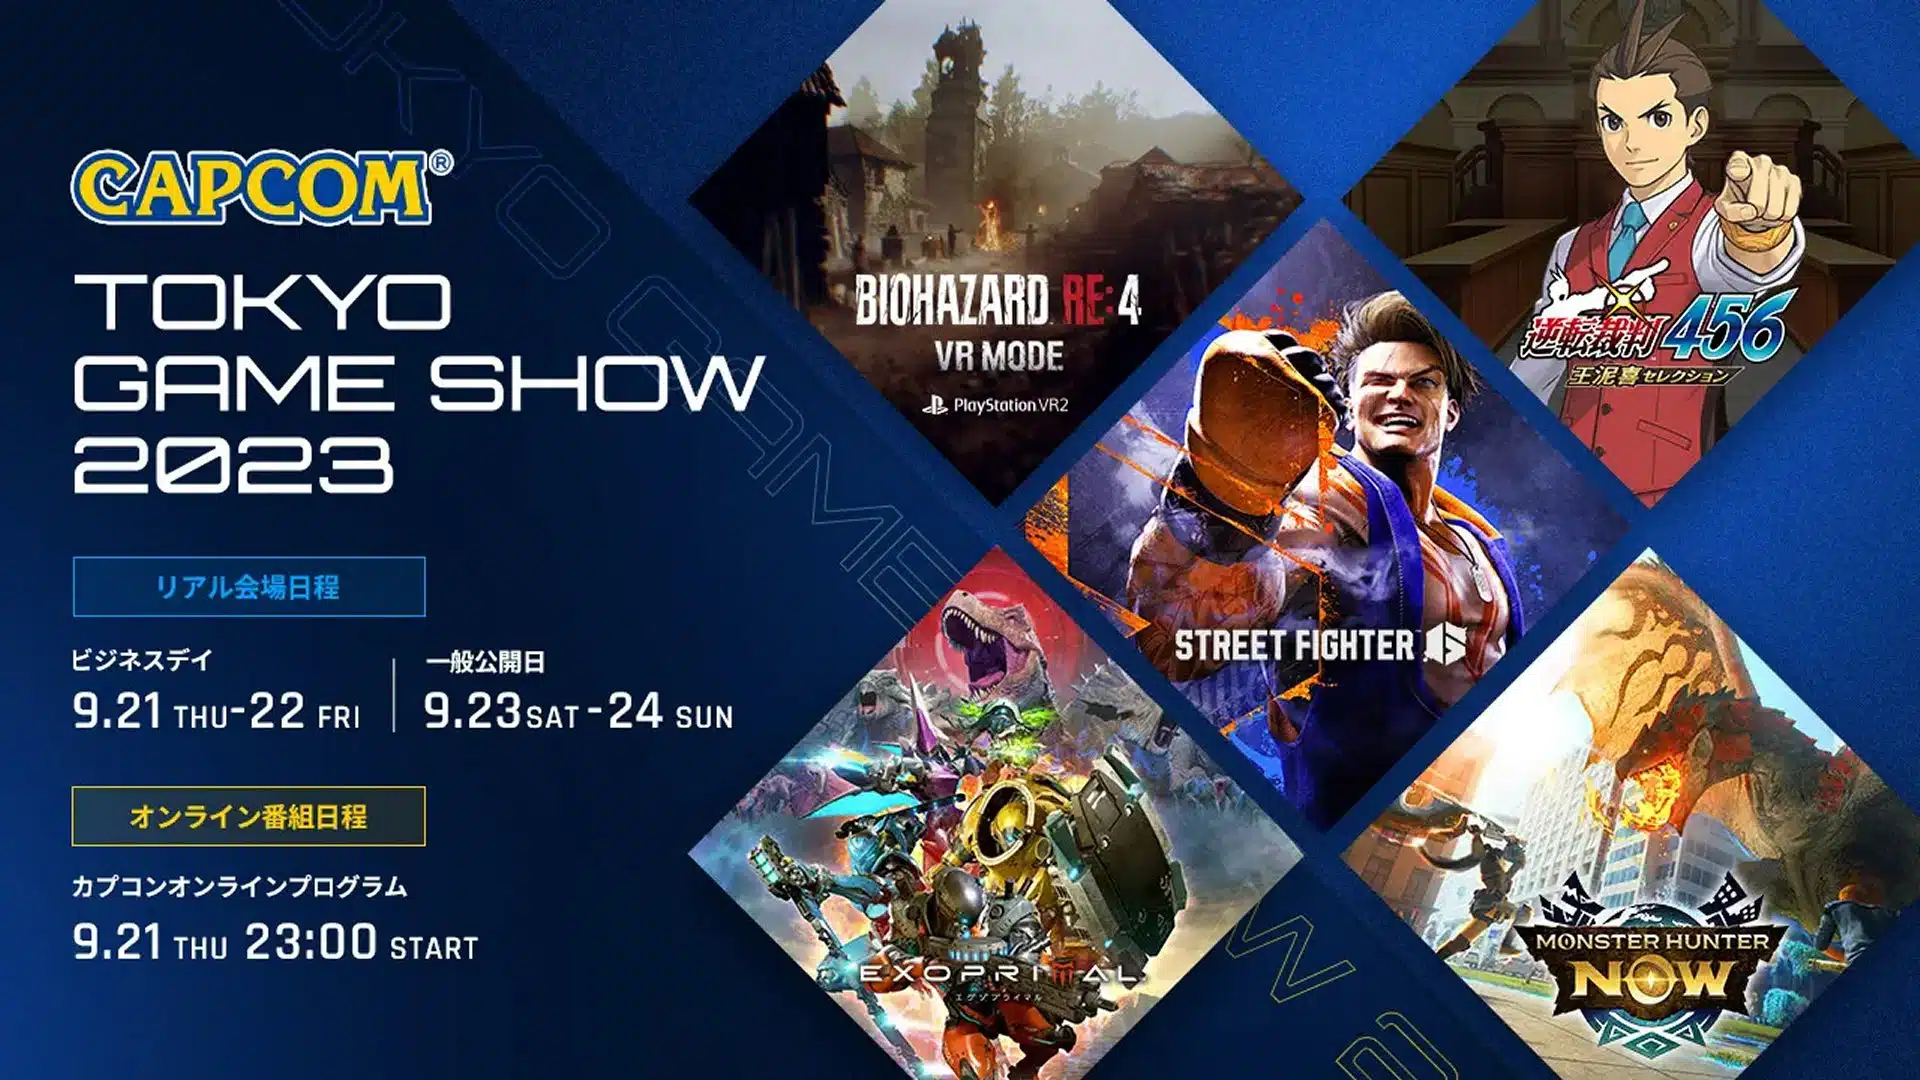 Capcom TGS 2023 Lineup and Schedule Announced